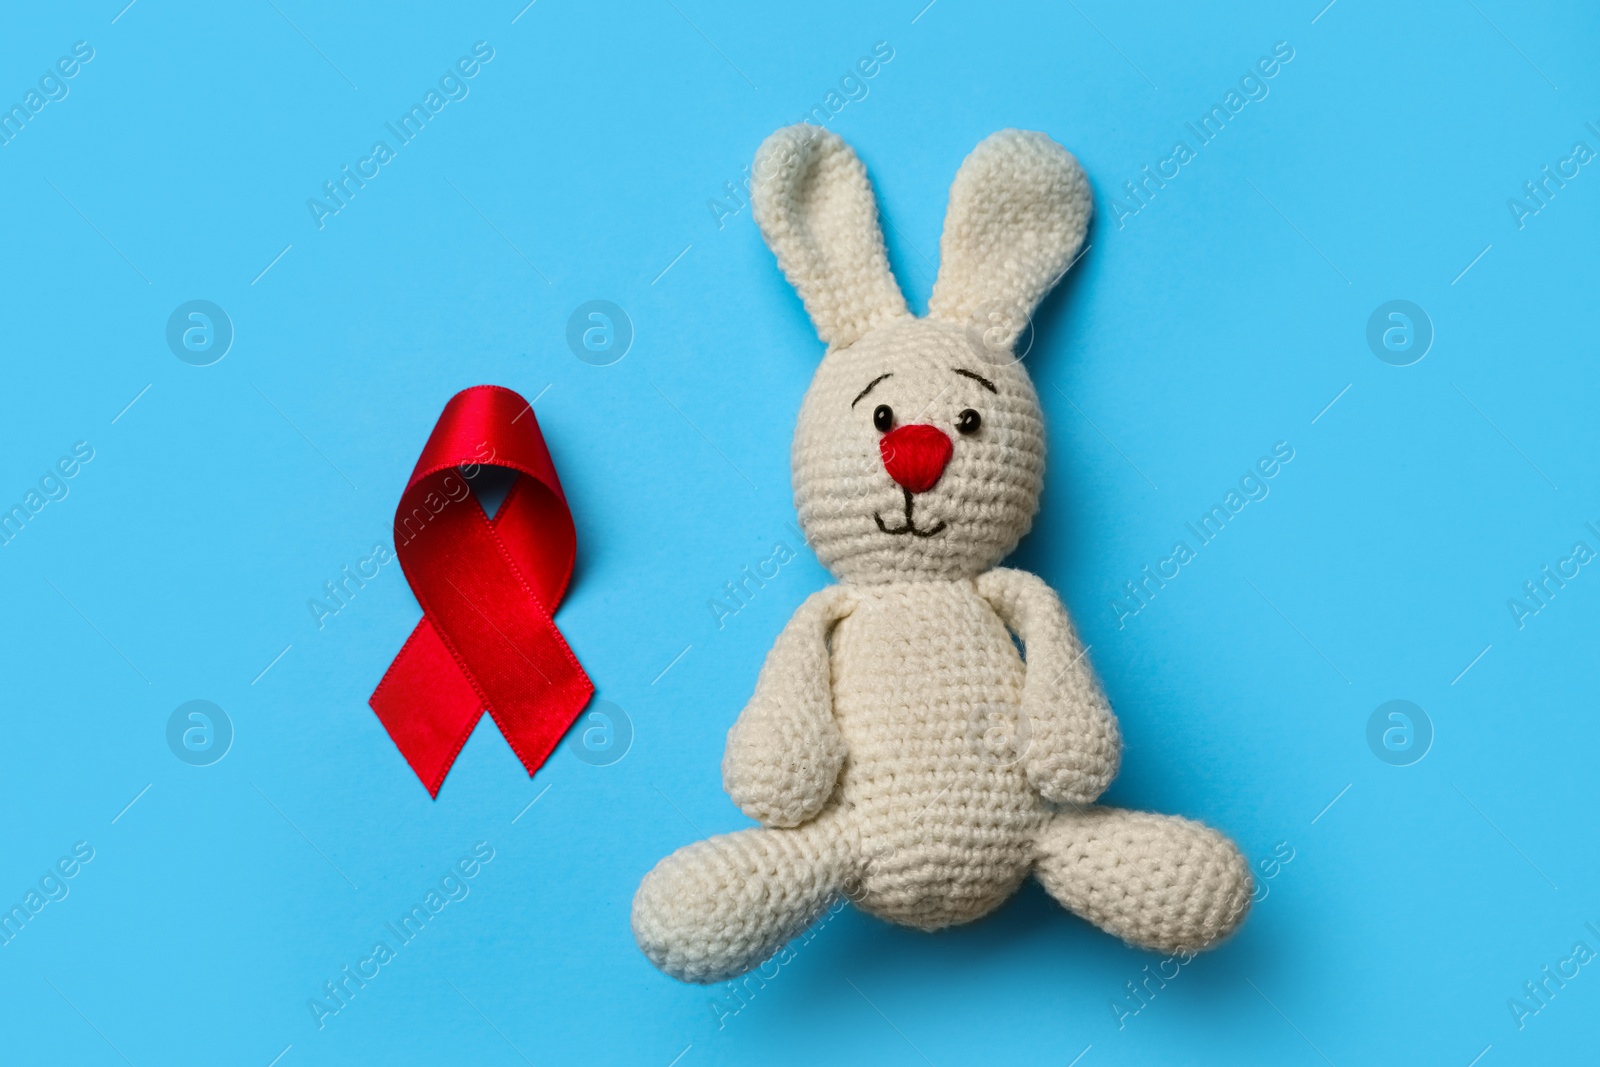 Photo of Cute knitted toy bunny and red ribbon on blue background, flat lay. AIDS disease awareness